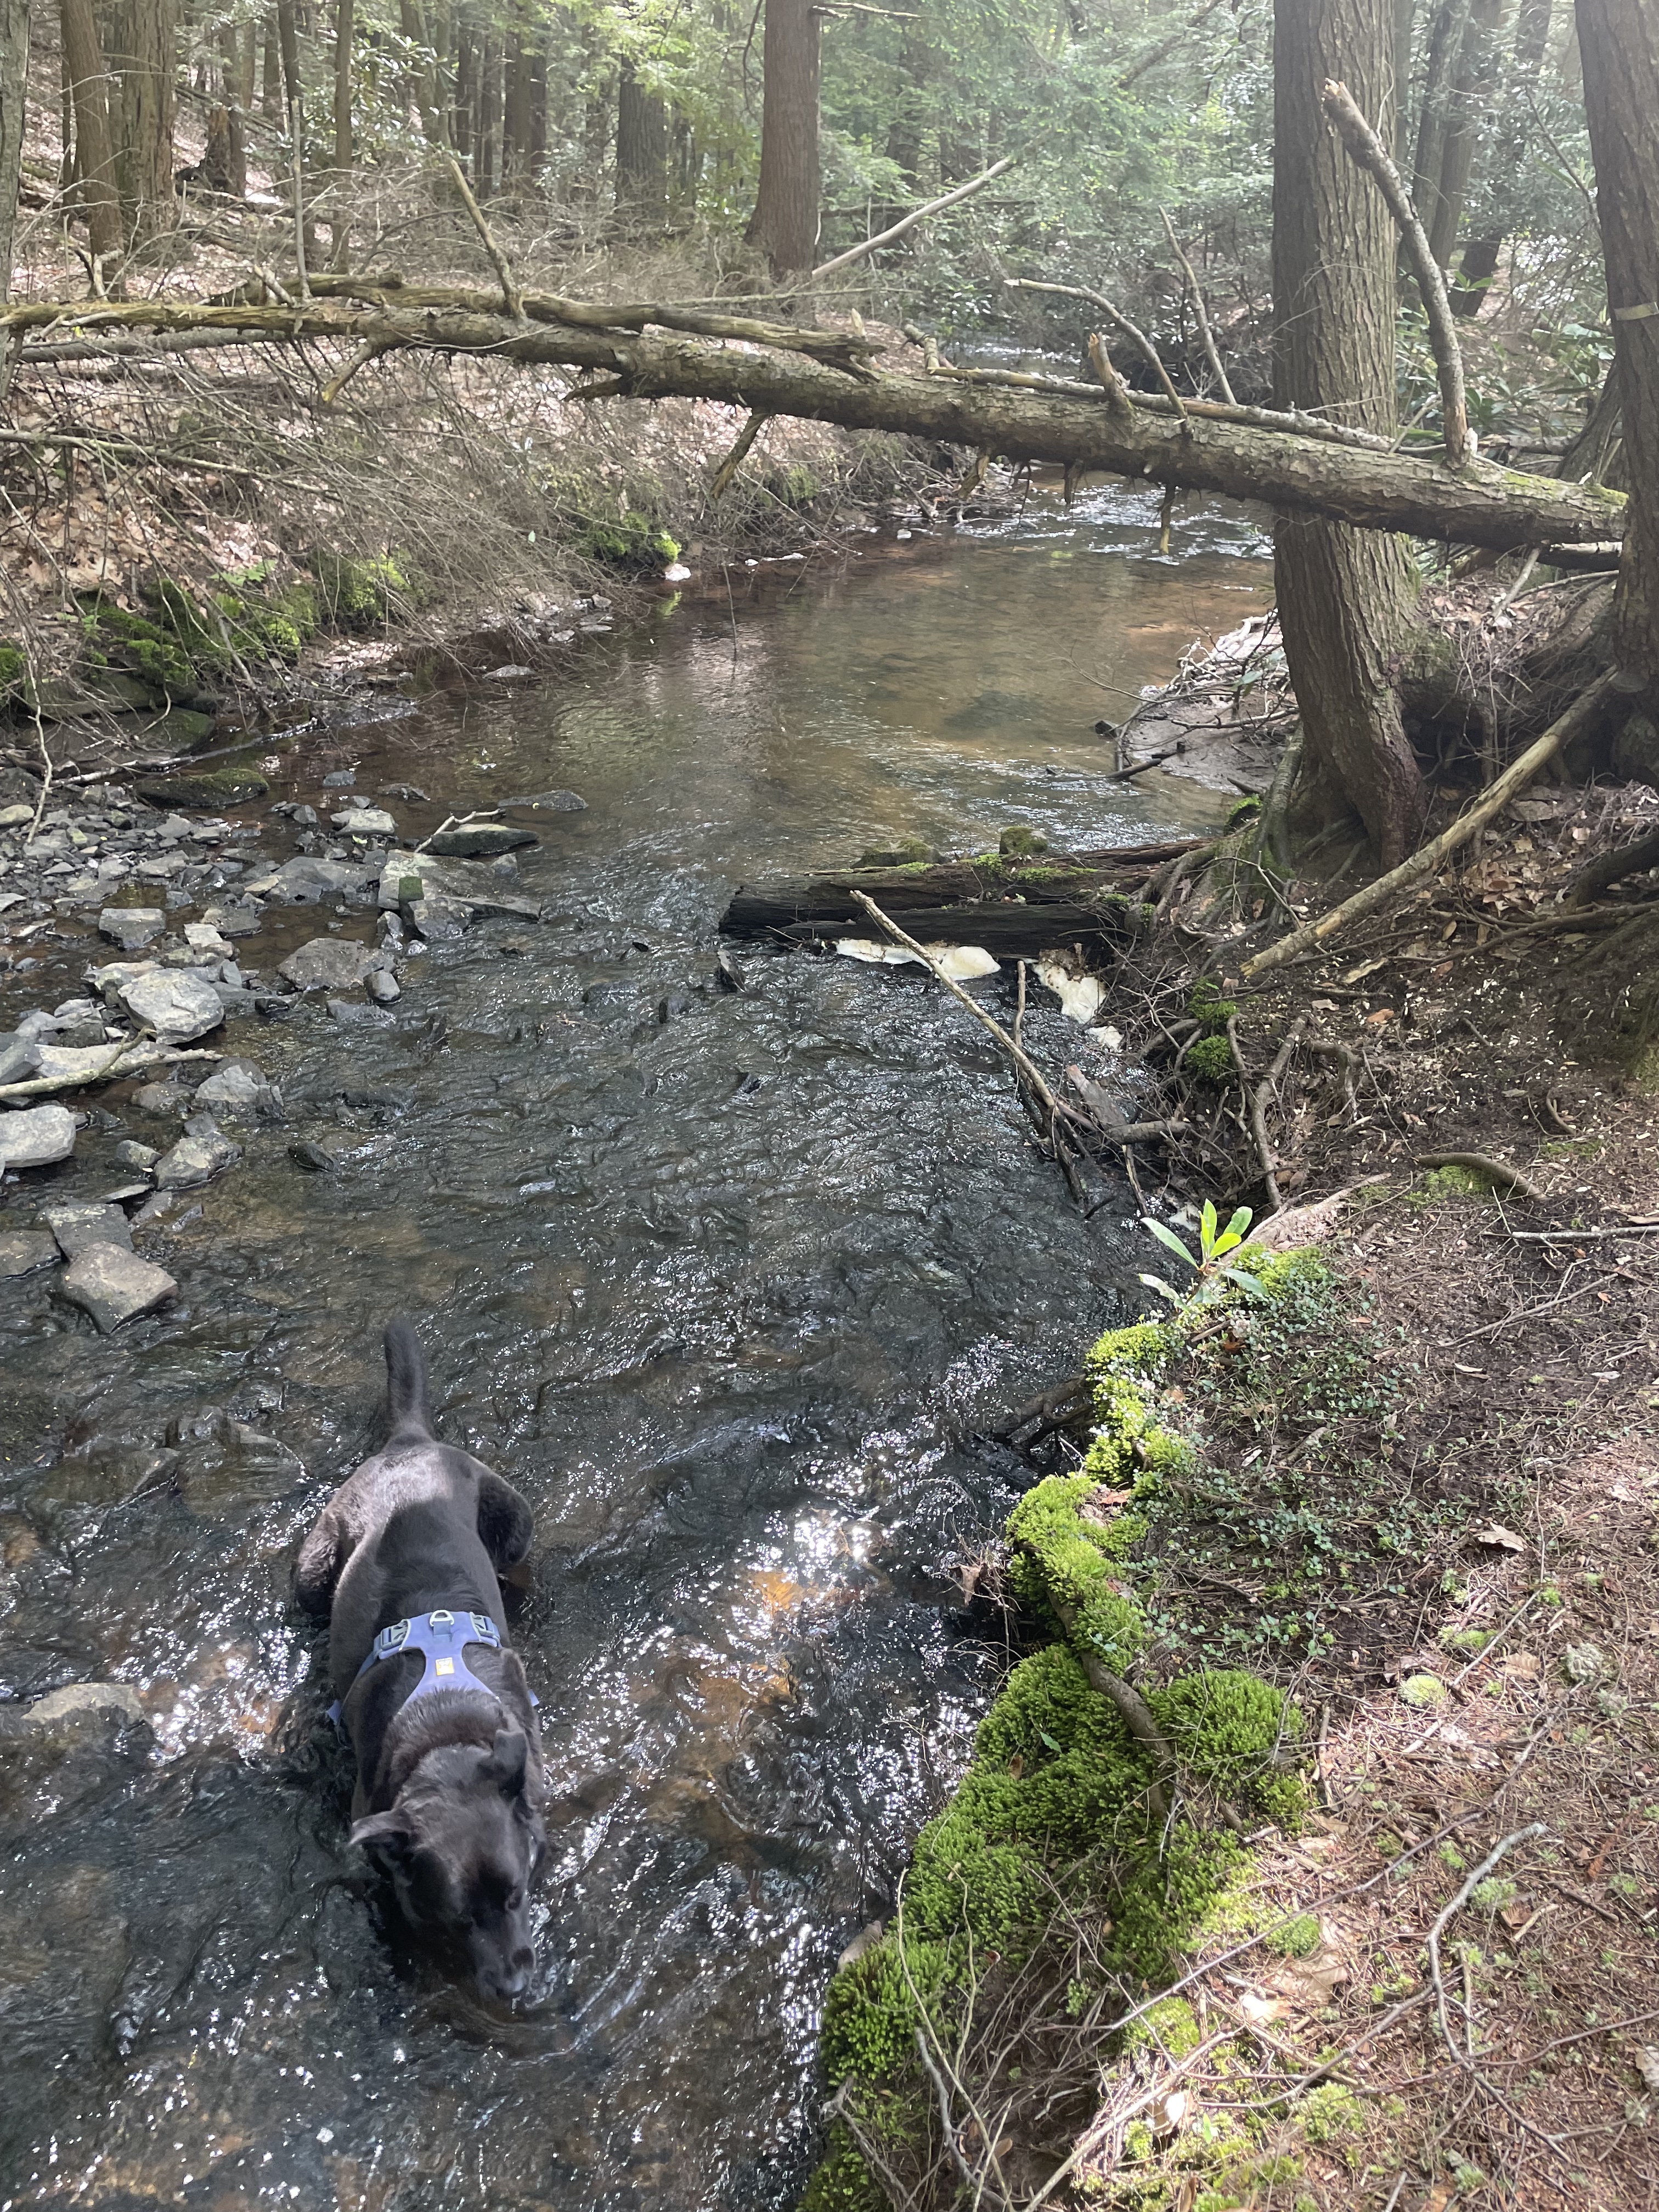 Black dog in the middle of a stream